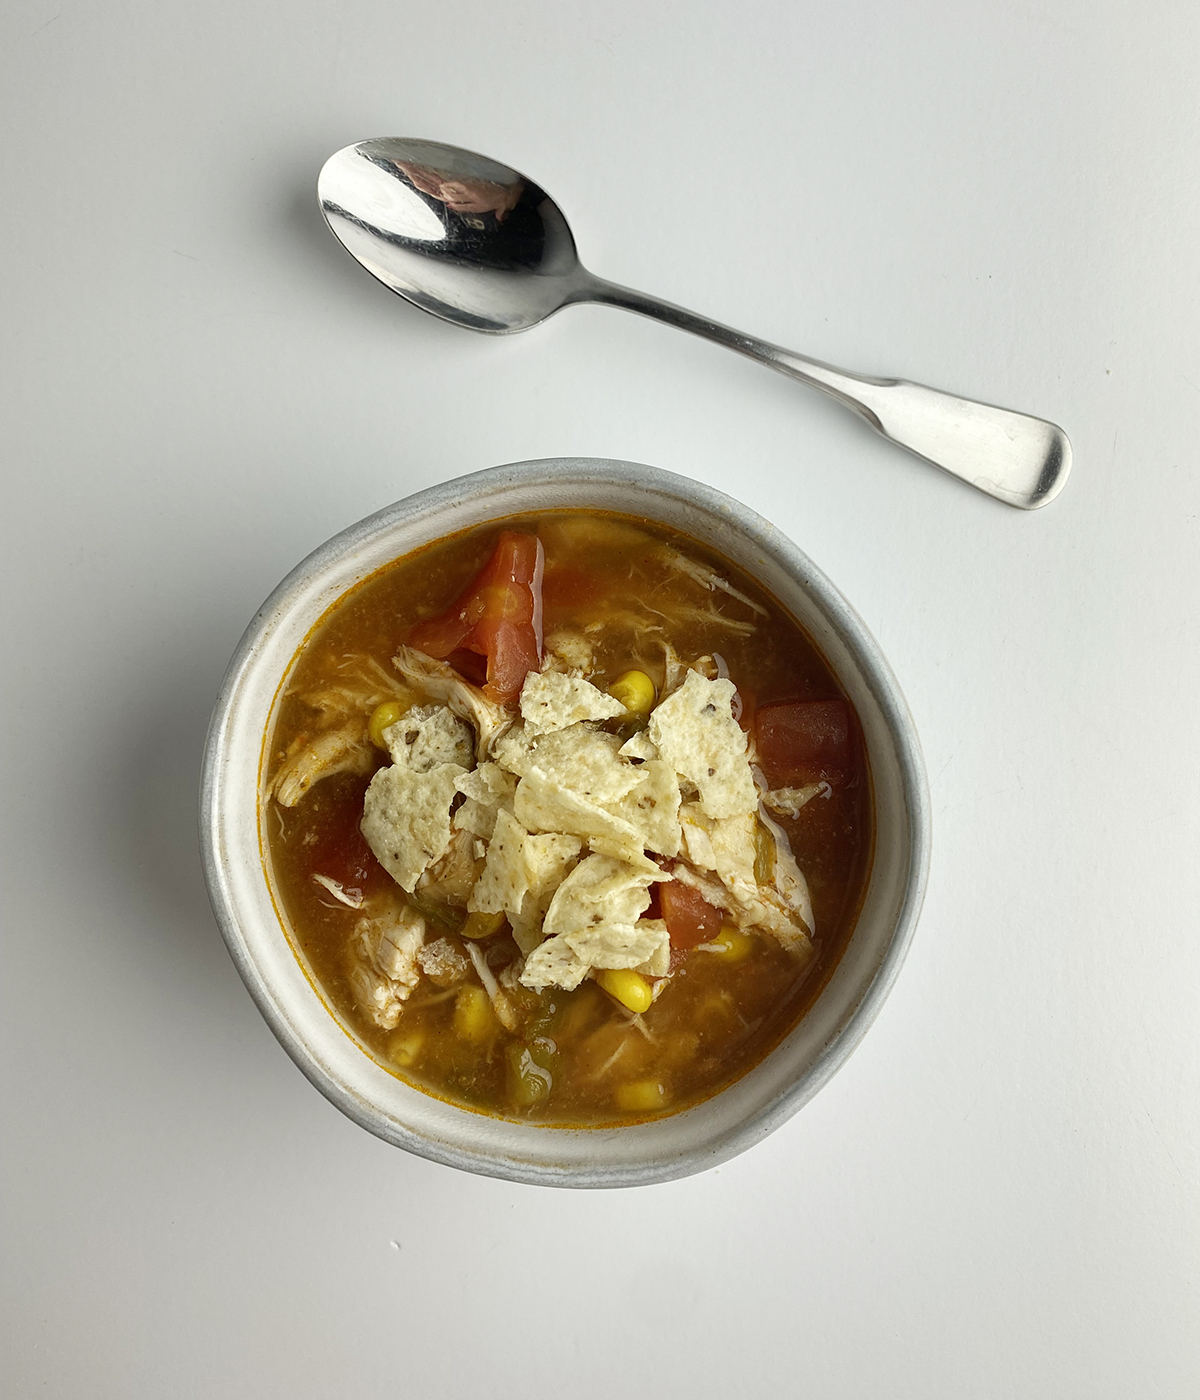 Slow cooker chicken tortilla soup with a spoon.